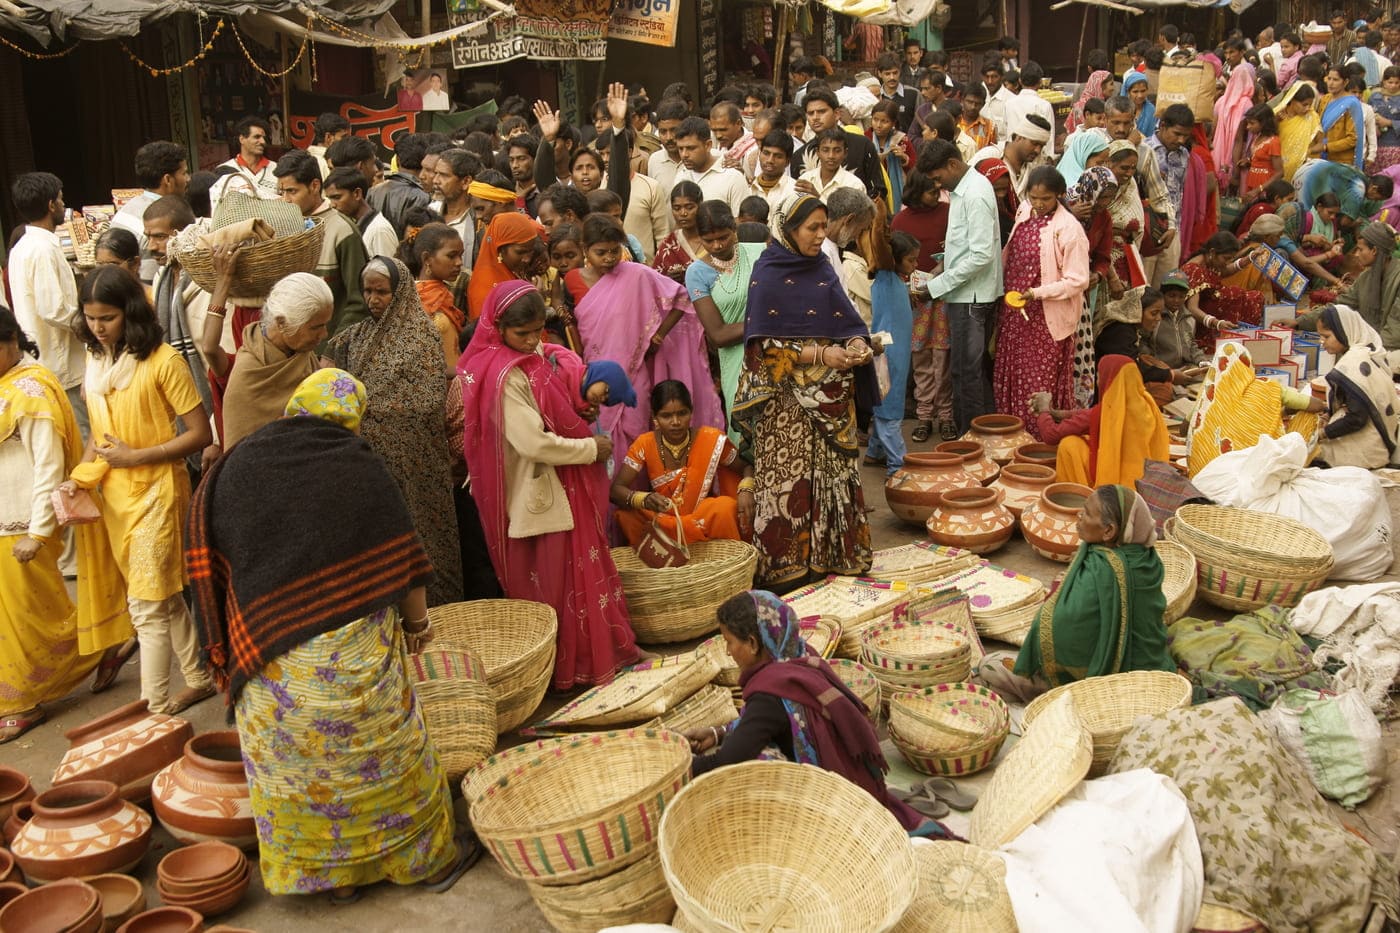 A scene from a village market in Orchha where women are selling handmade cane baskets and earthenware 